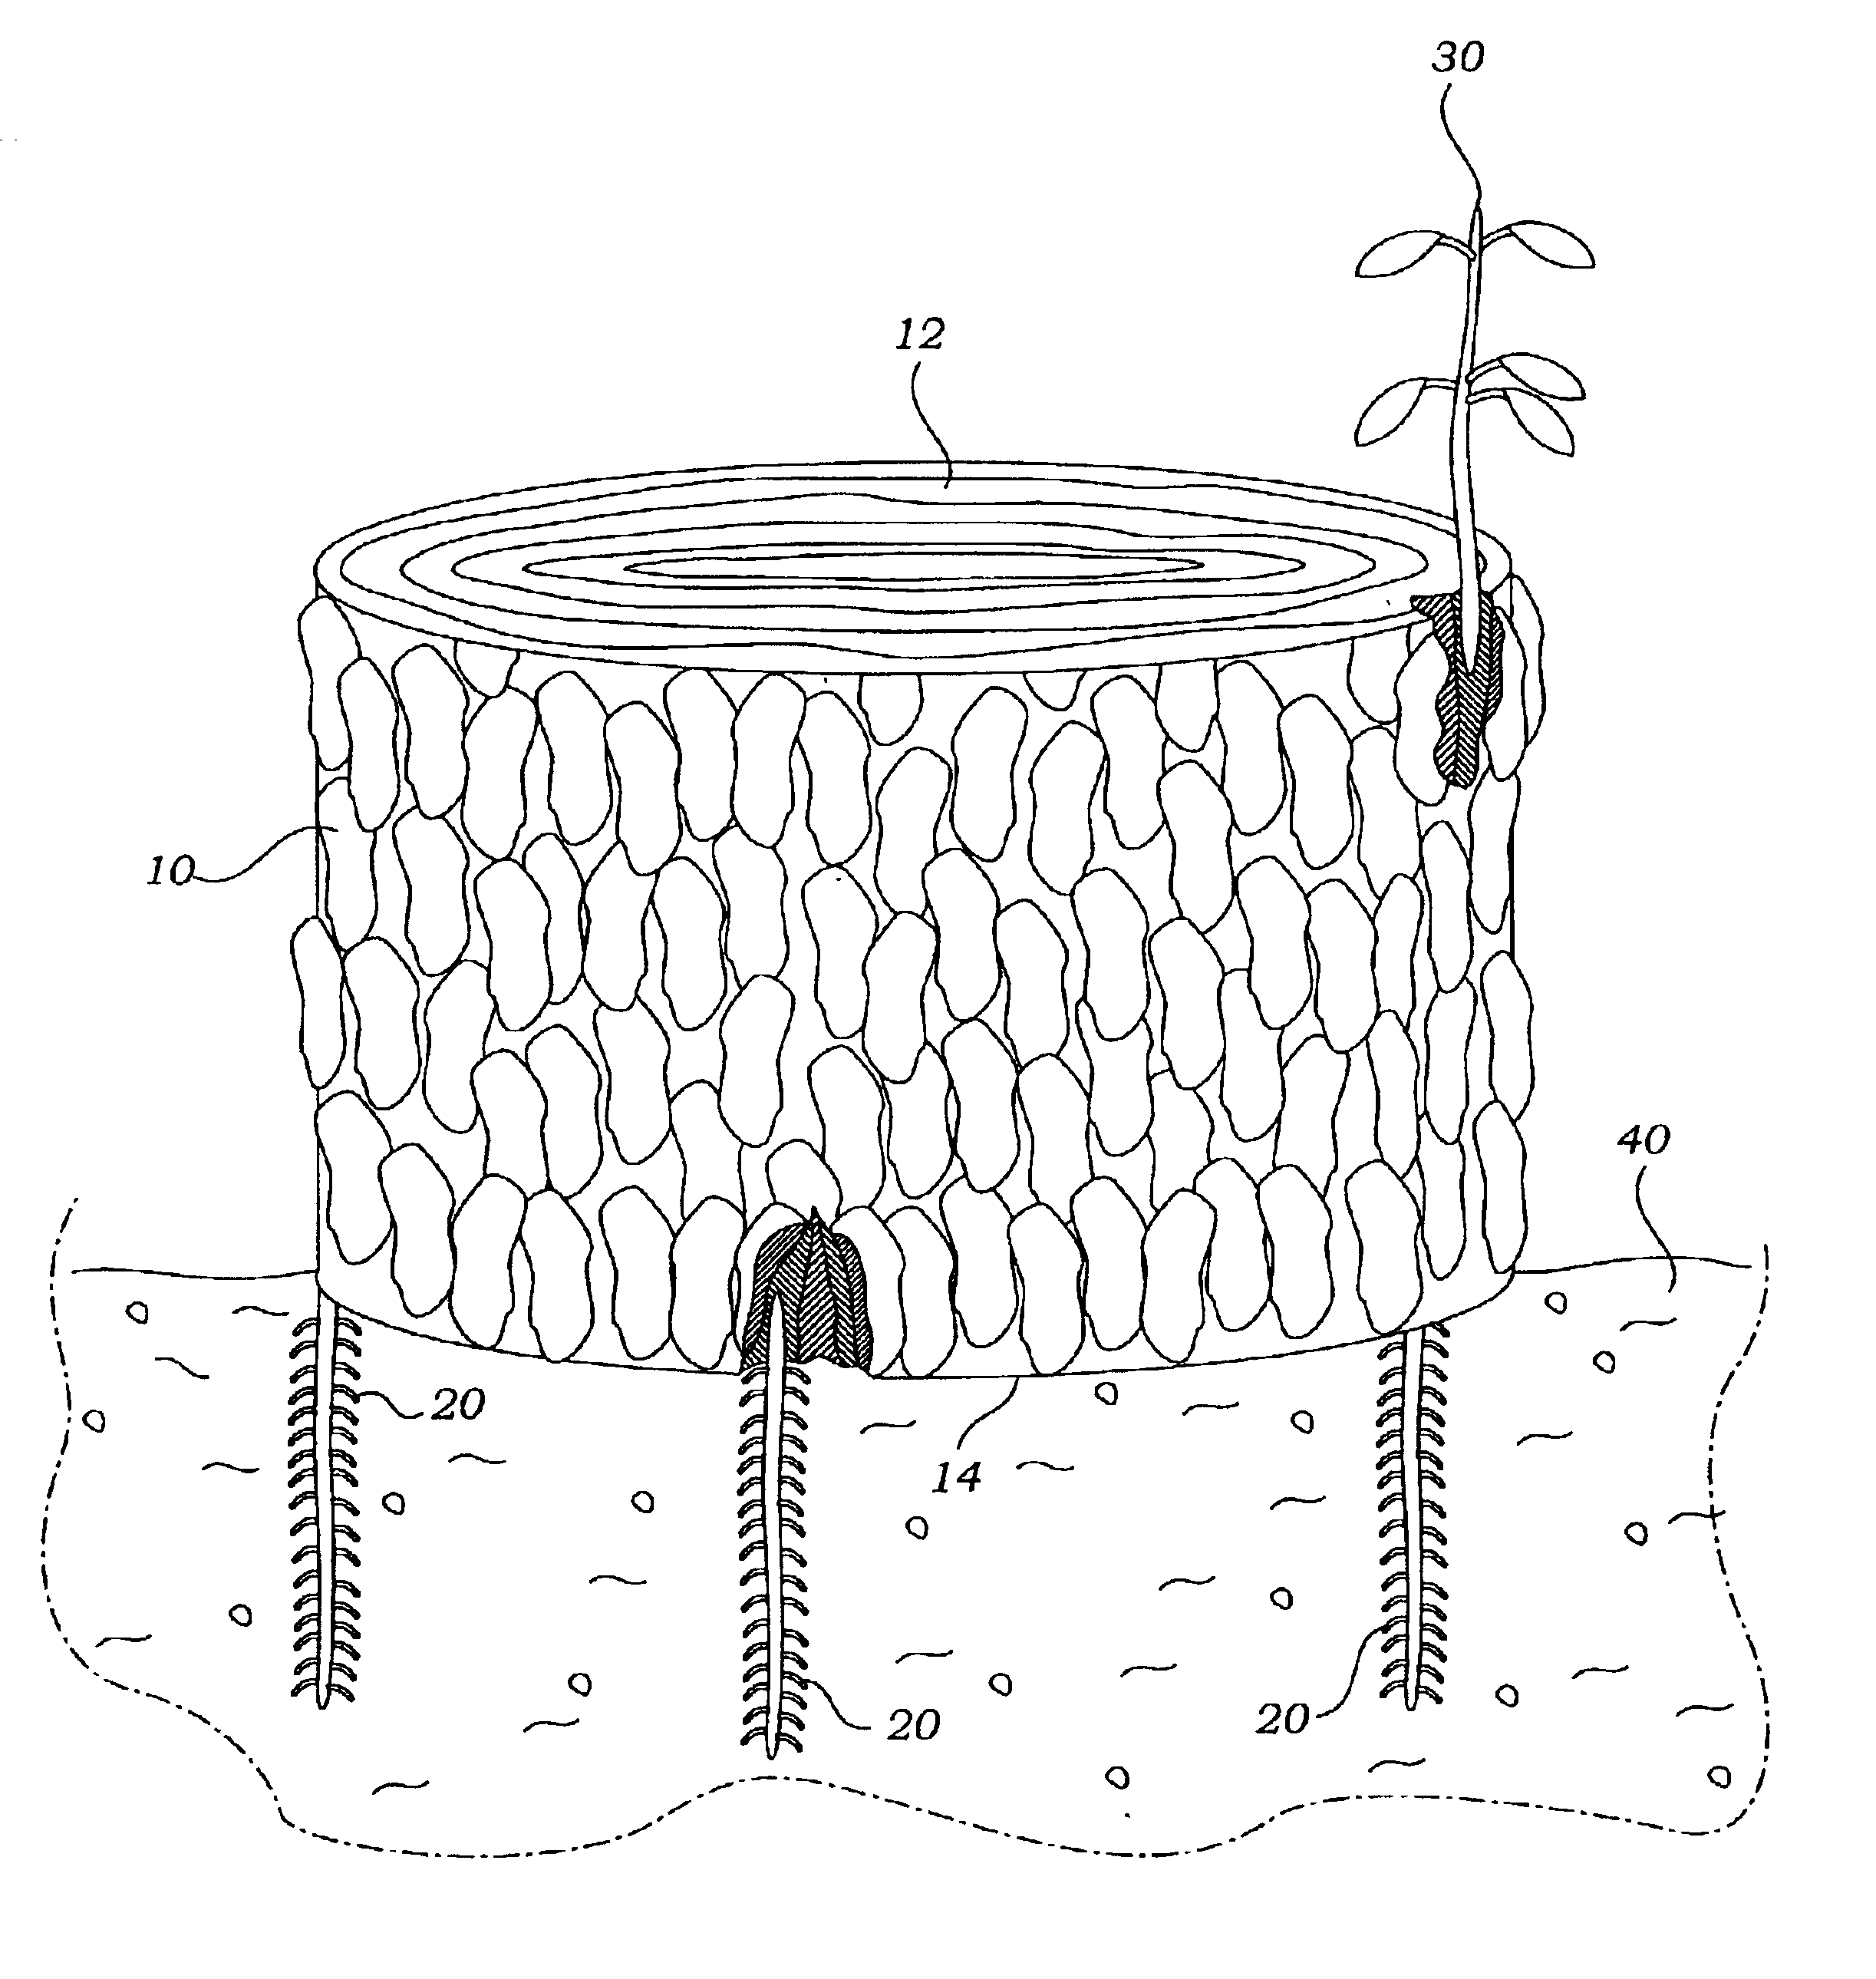 Method of plant propagation using root bark-grafting to sections